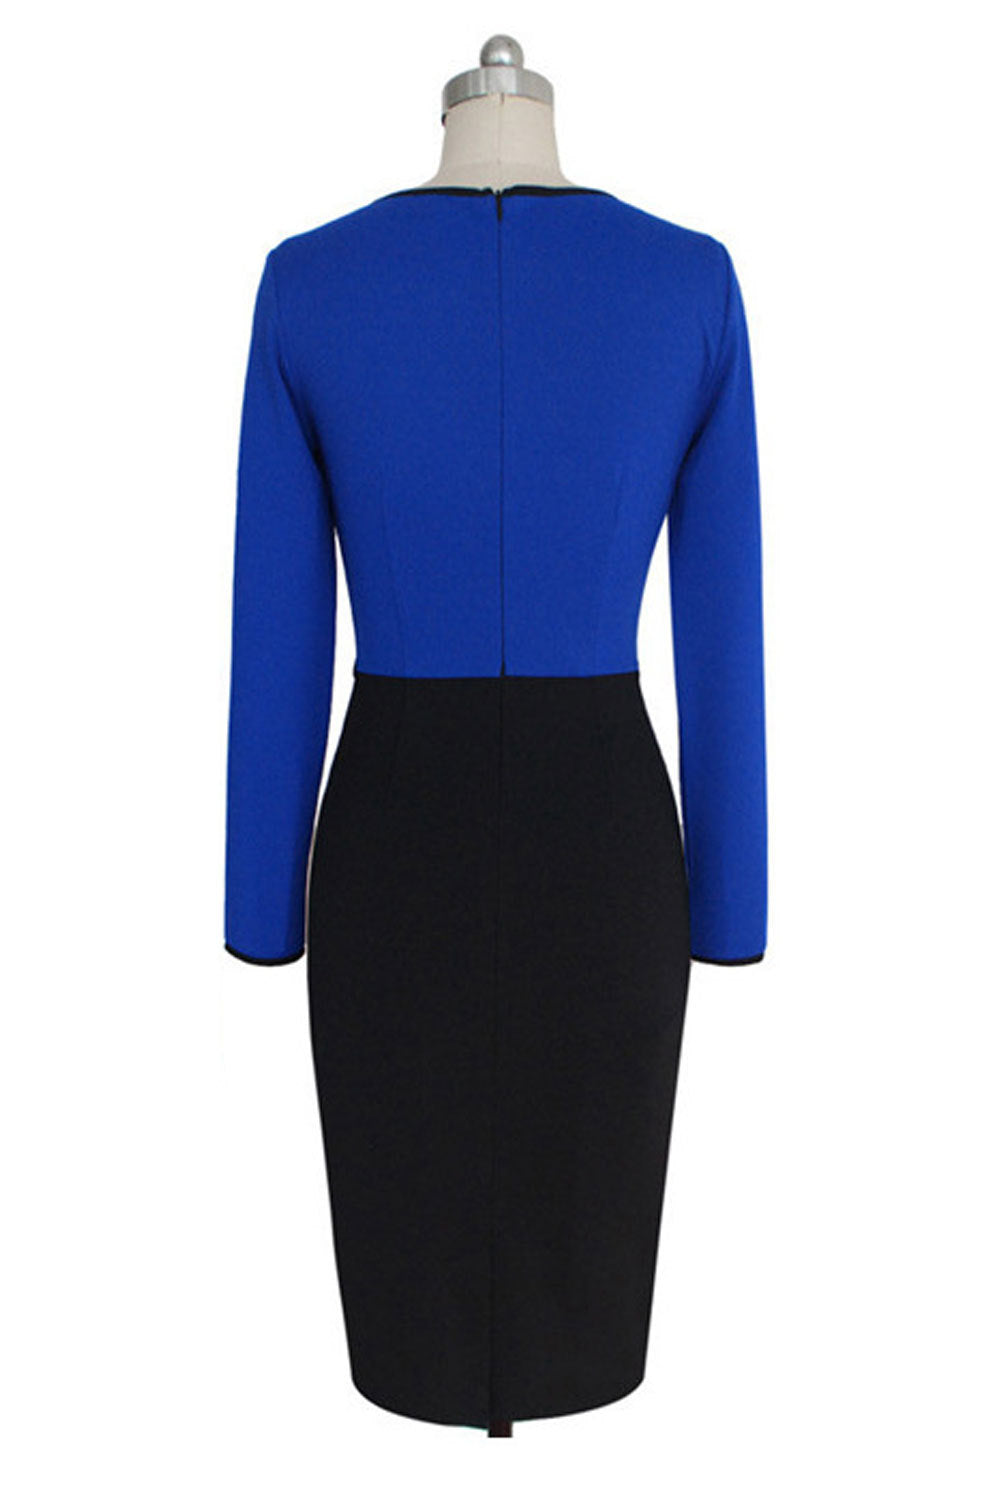 Ketty More Women Slim Bodycon Long Sleeves Dress Decorated with Bow Black Blue-KMWD293